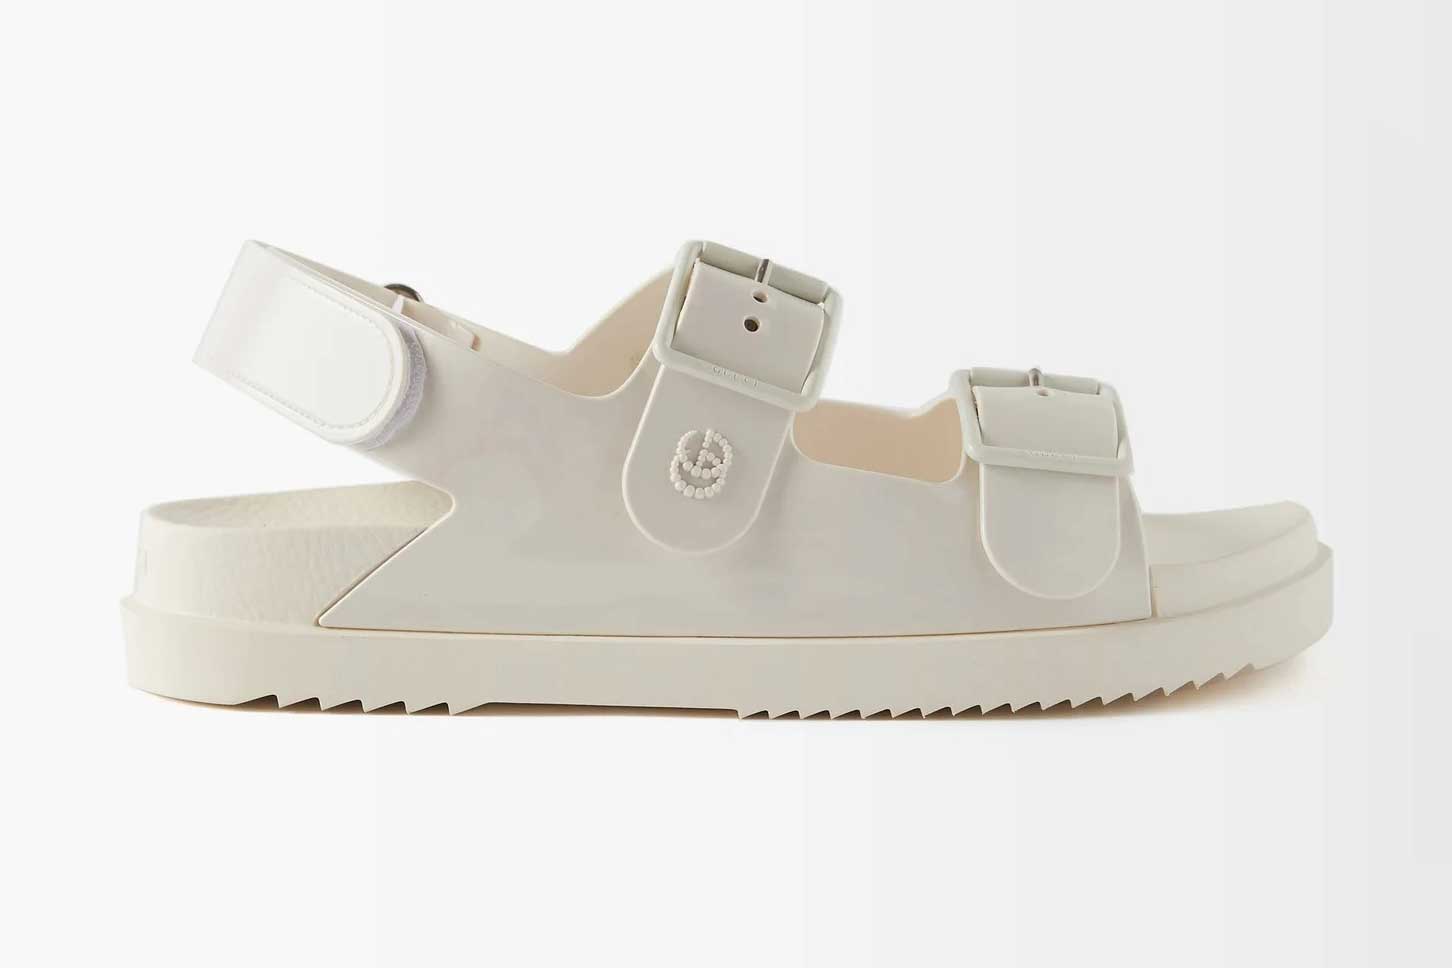 Chanel's Dad Sandal Trend Inspired Luxury Shoe Dupes